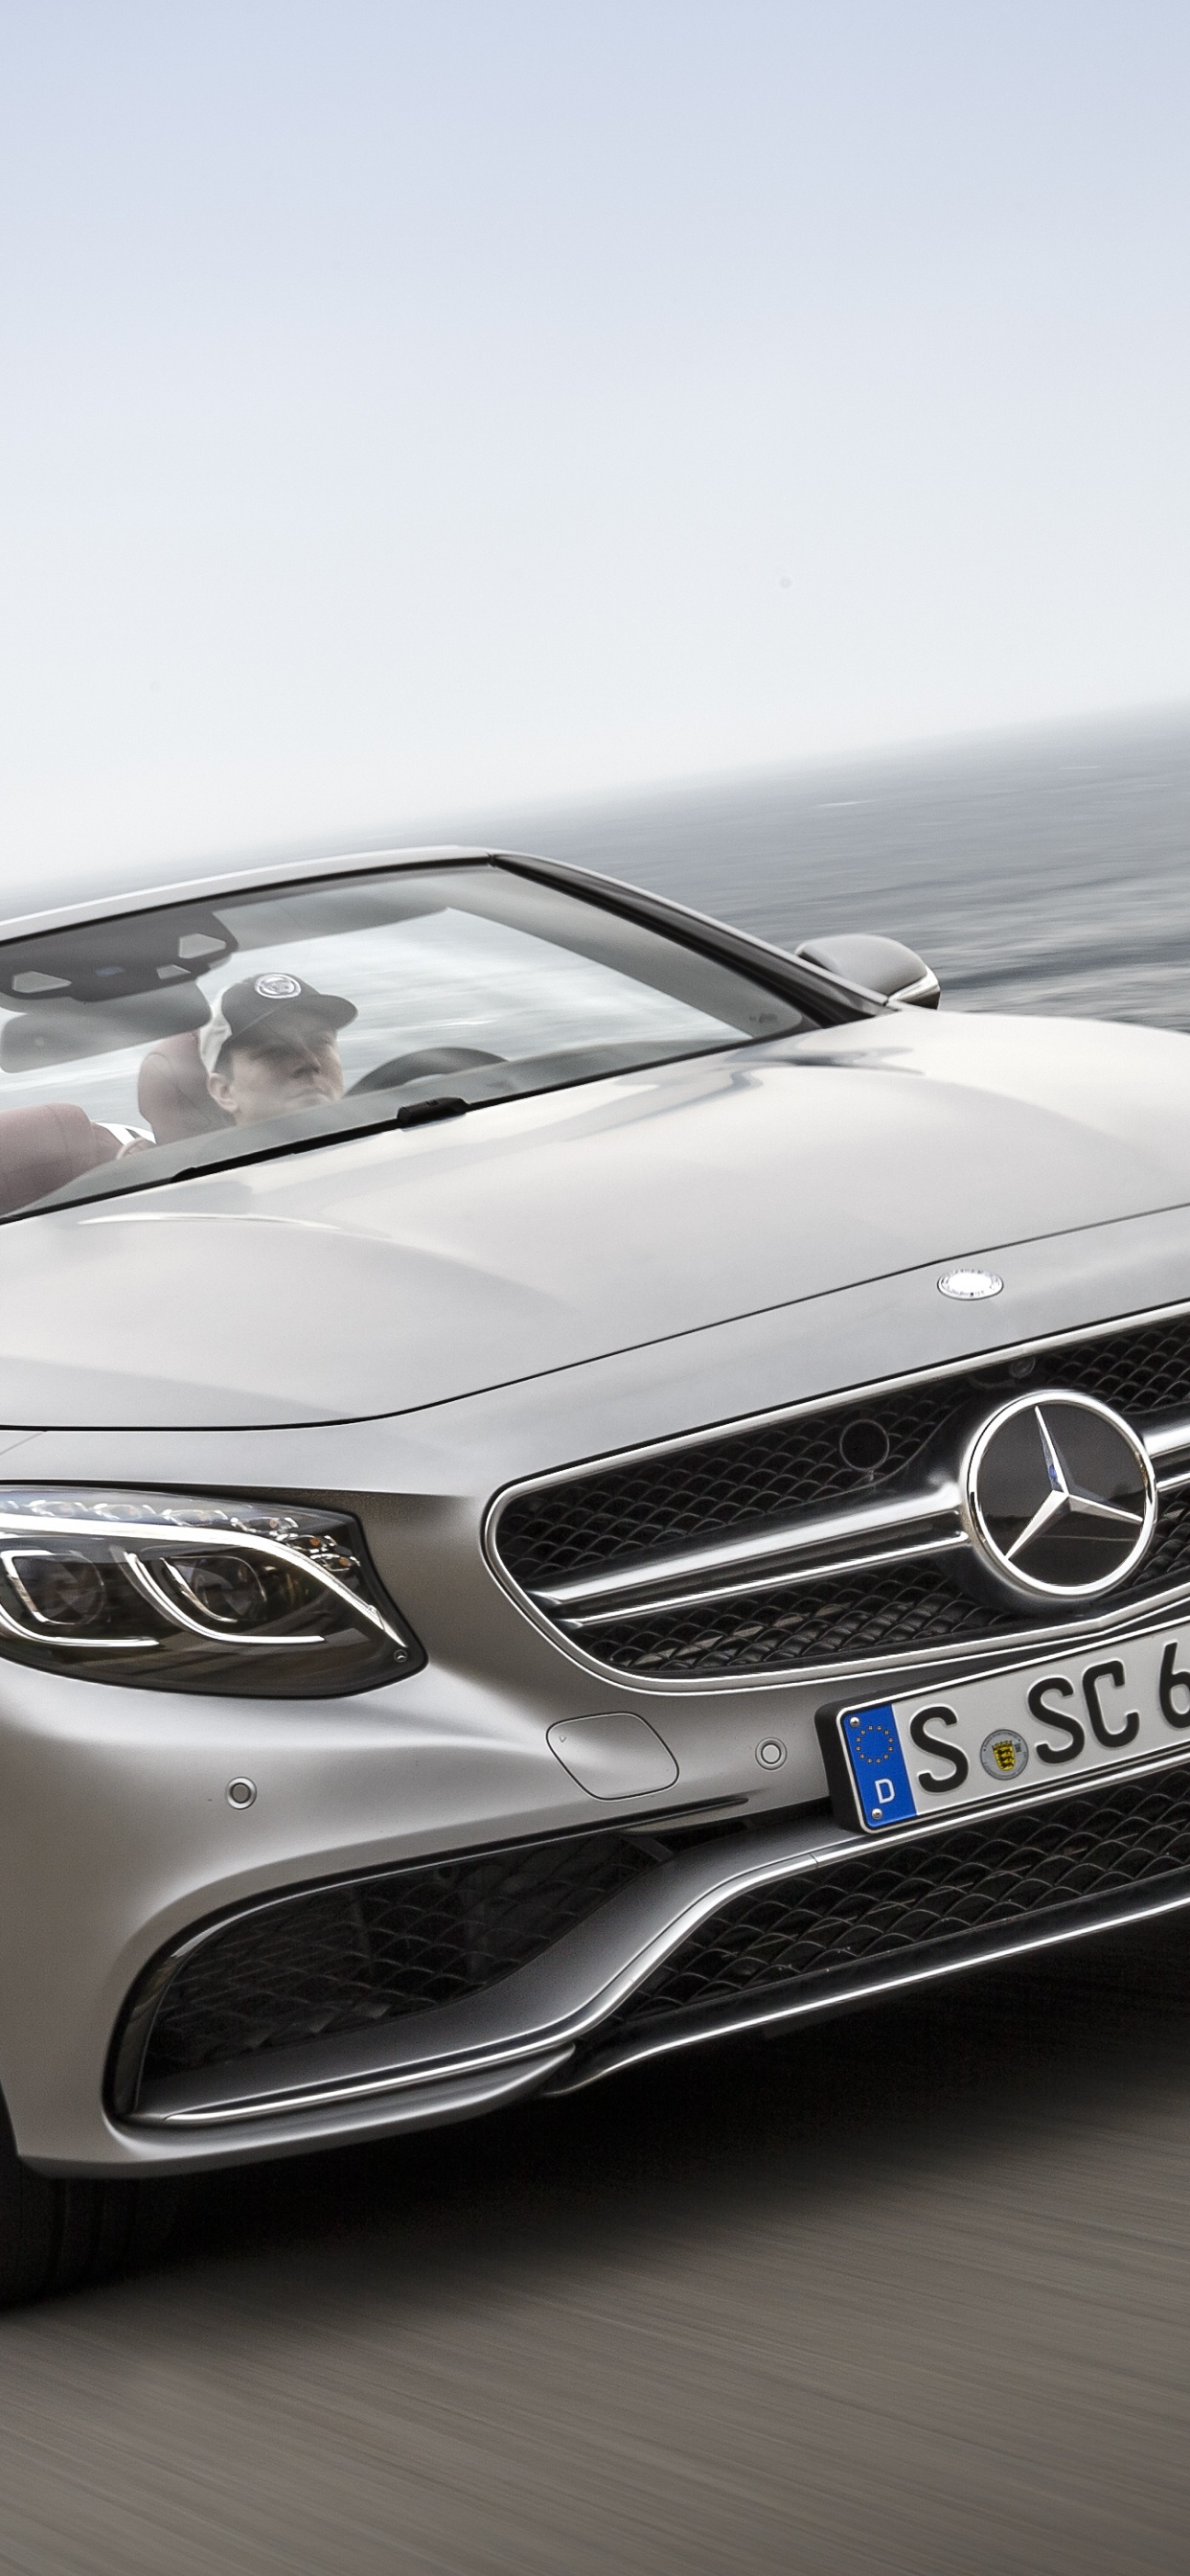 Gray Mercedes Benz Convertible Coupe on Road During Daytime. Wallpaper in 1242x2688 Resolution